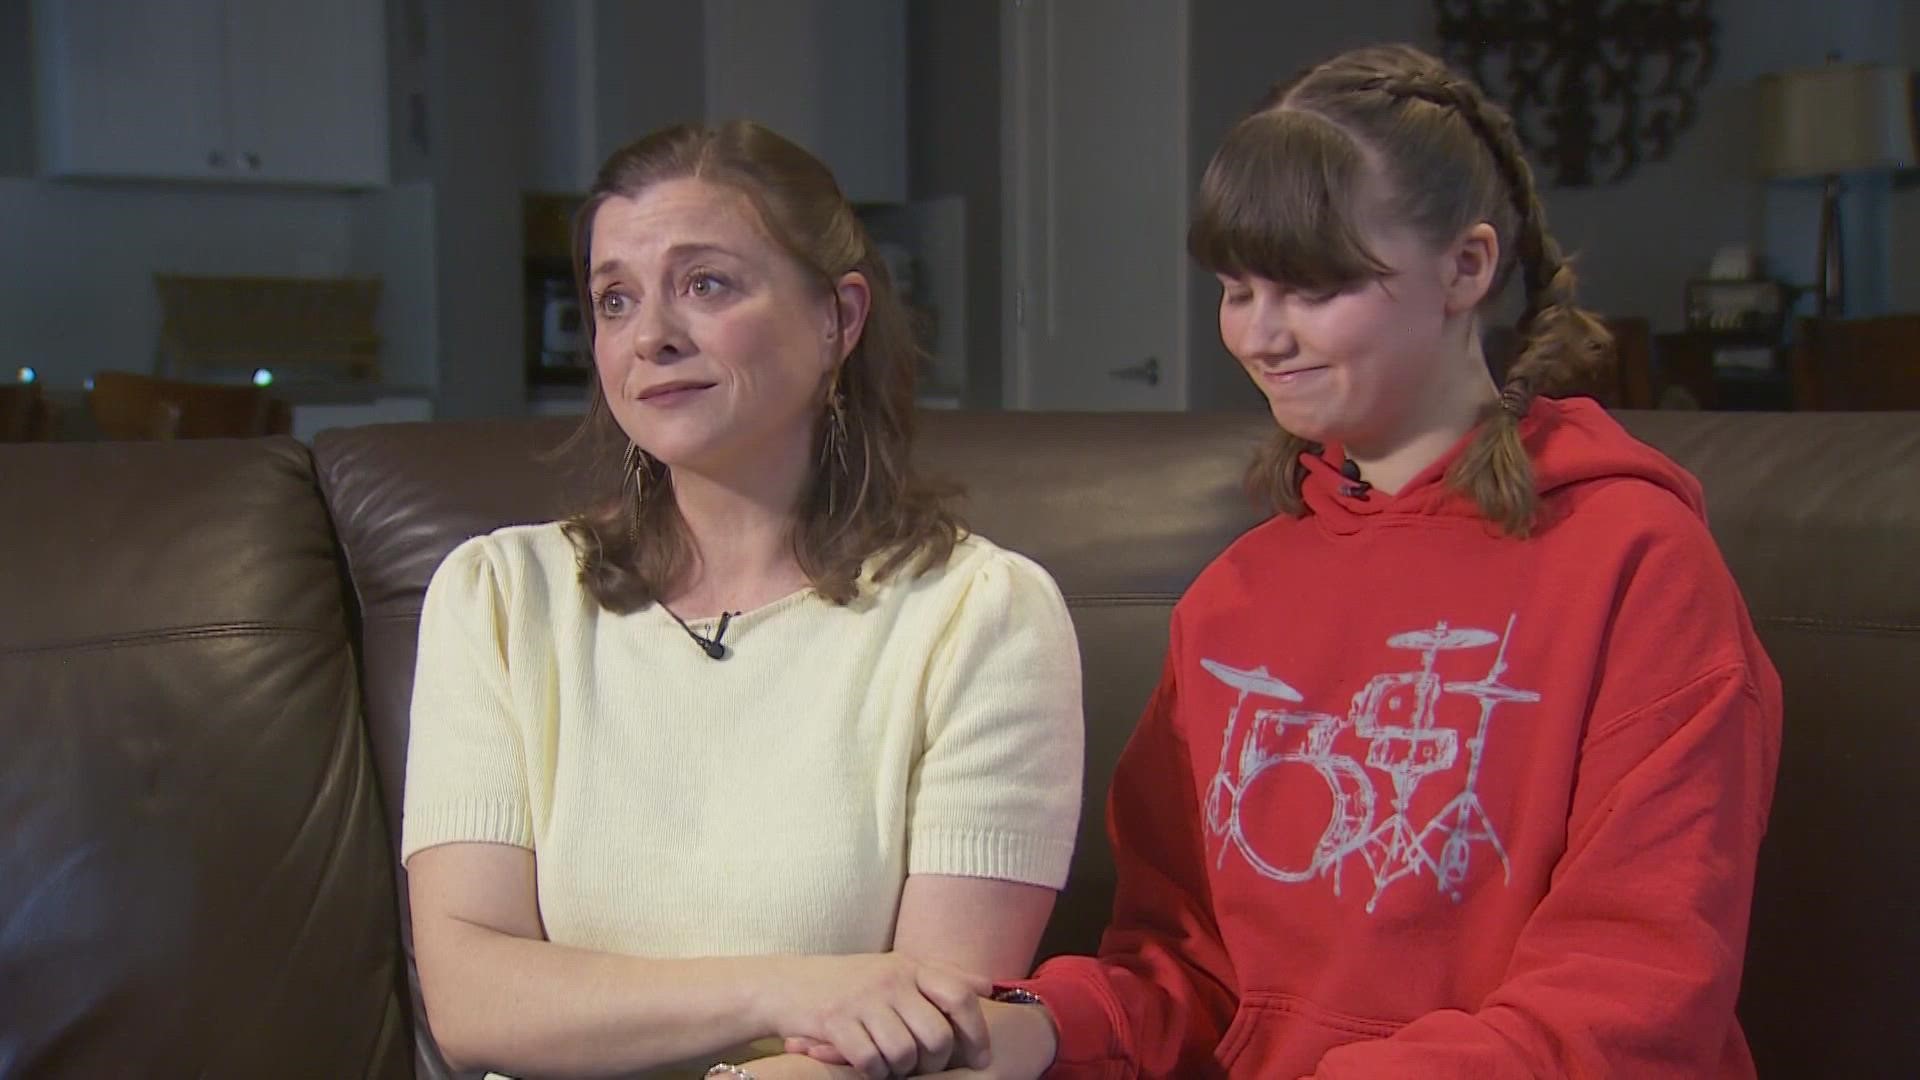 A student’s family says the Fife band teacher told their daughter, who has a rare brain disorder, she wasn’t ready to perform but never watched her audition tape.